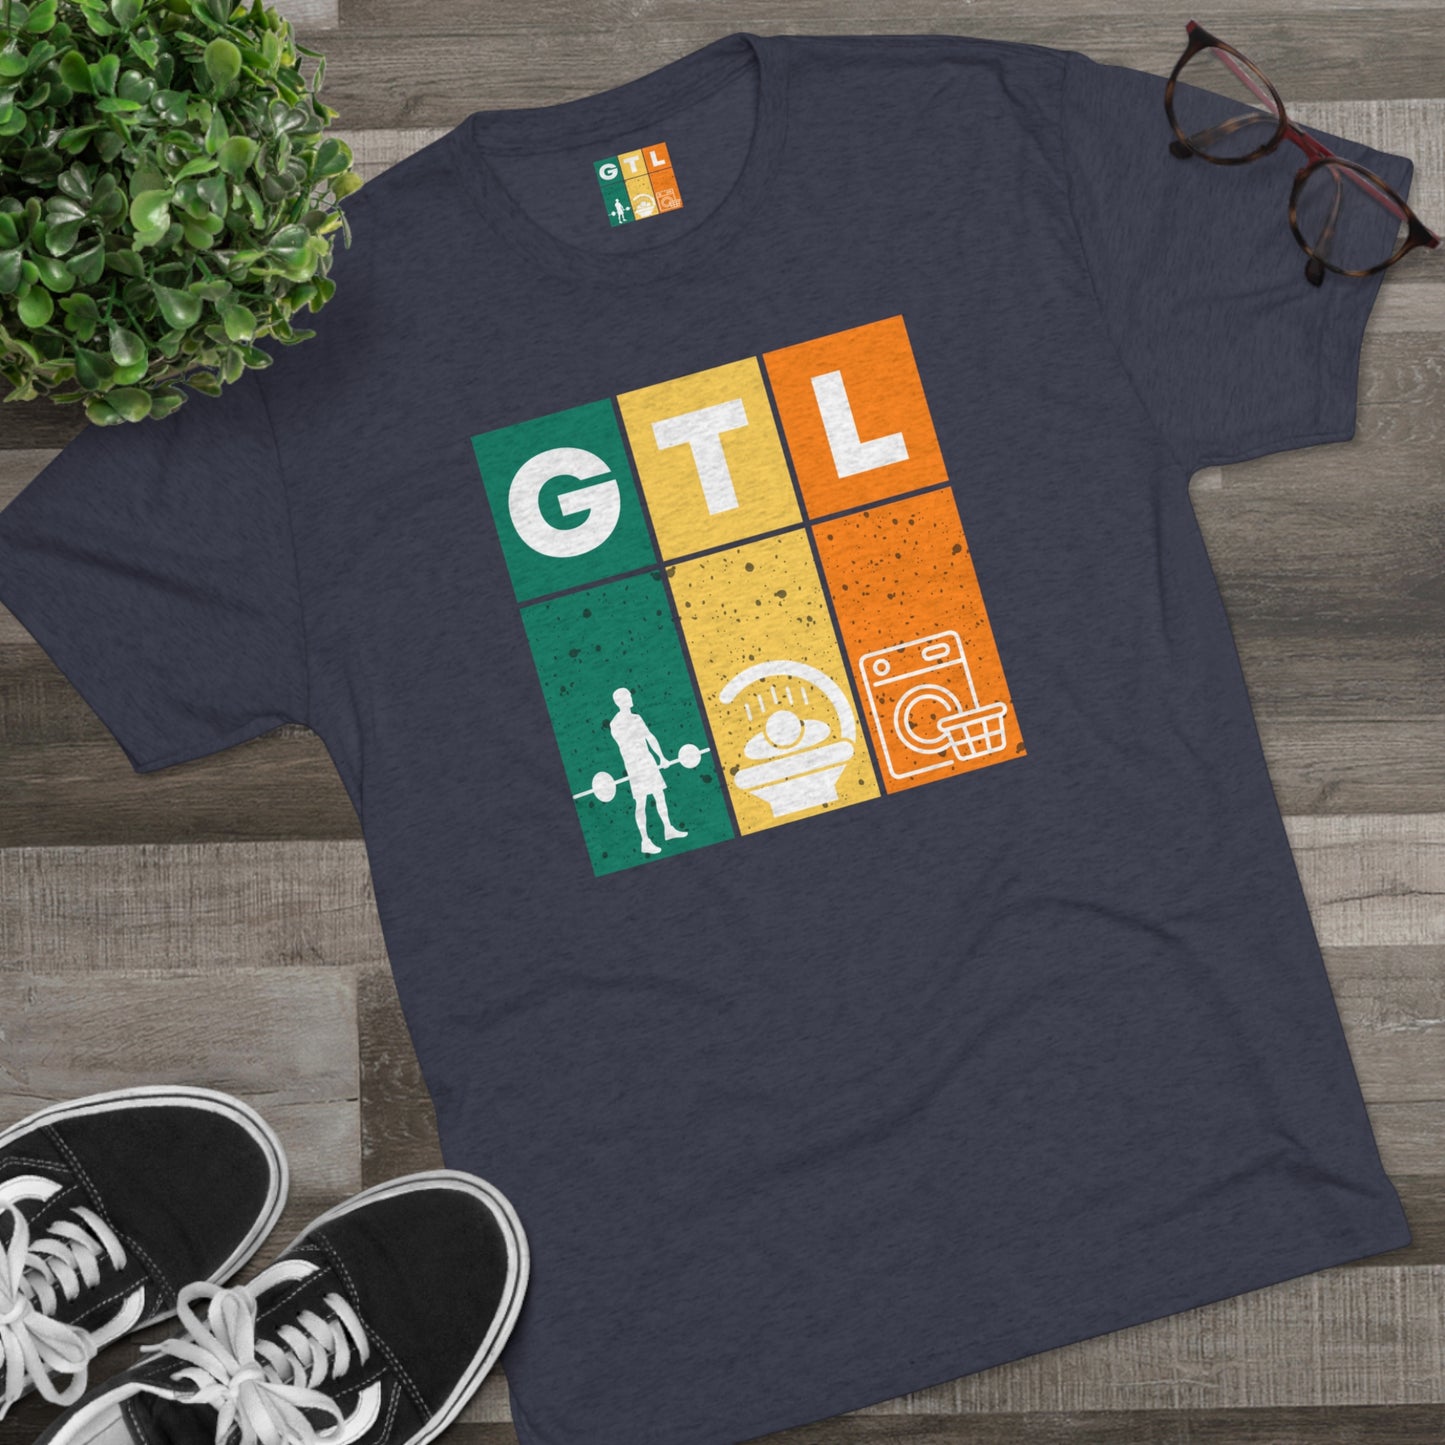 Summer Vibes Tri-Blend T-Shirt - Ultra-Soft & Breathable - Perfect for Sunny Days